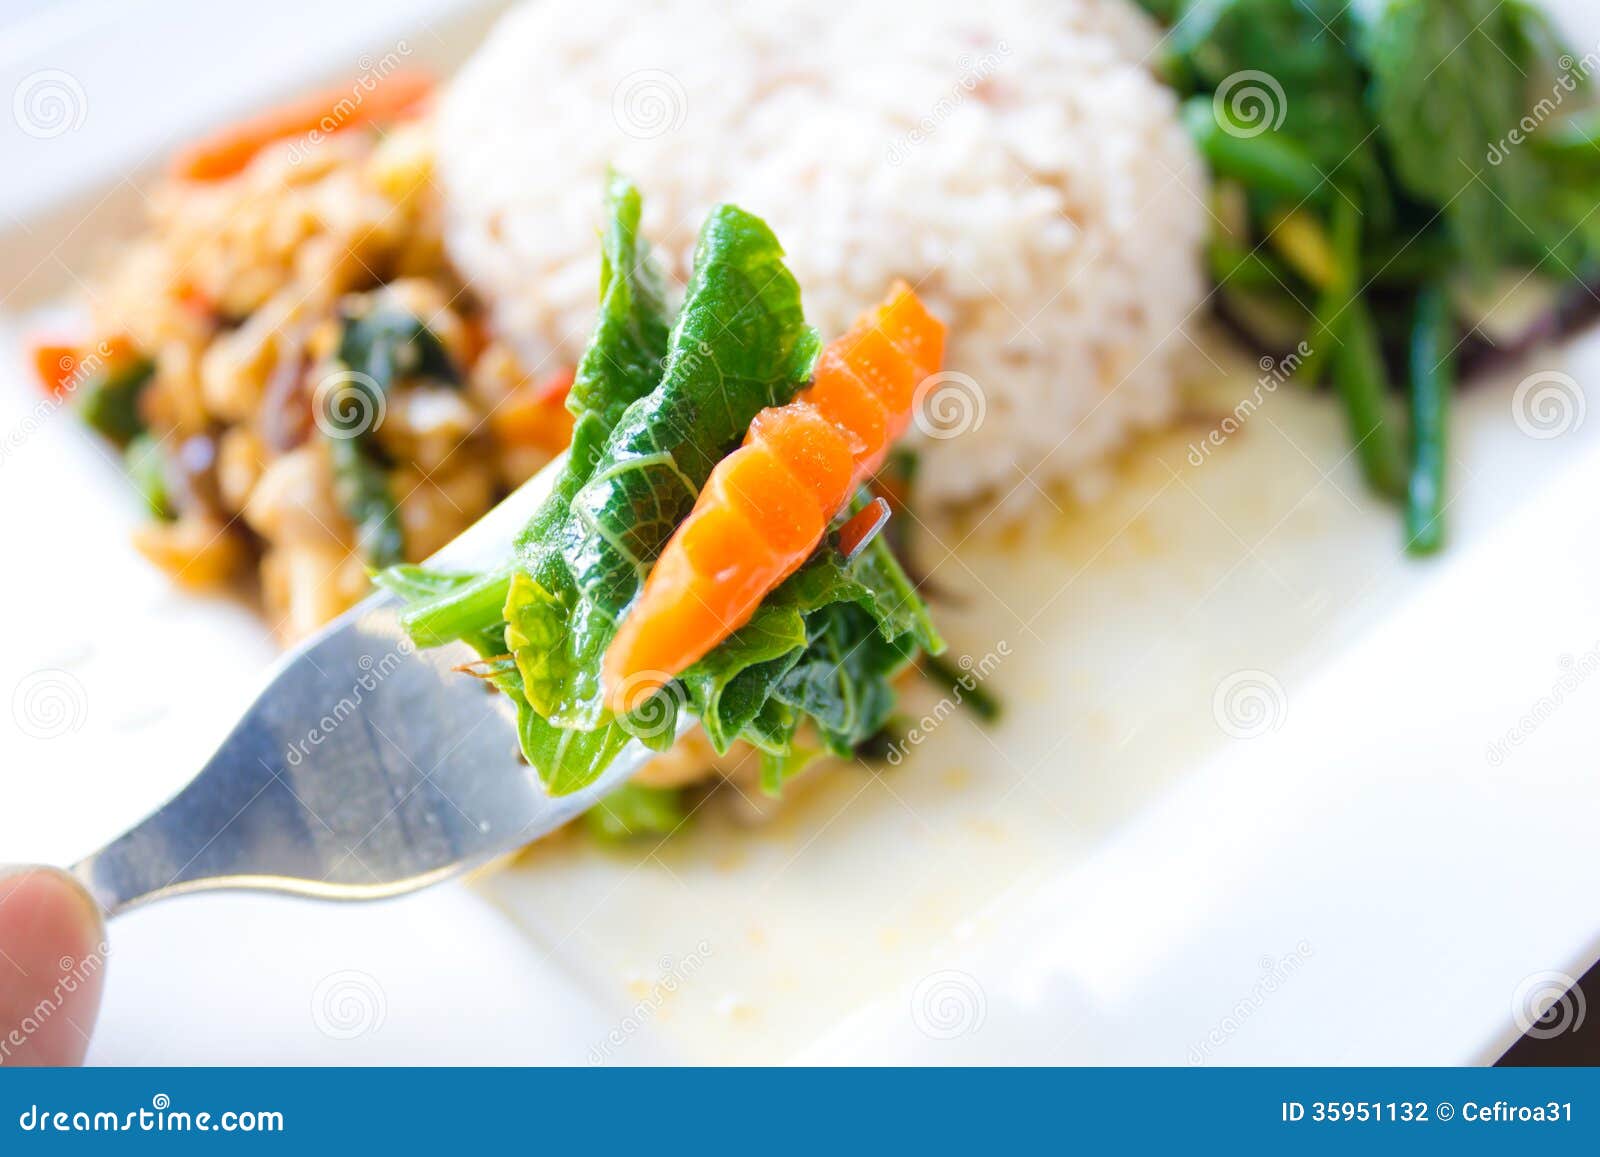 Rice with vegetables stock photo. Image of healthful - 35951132